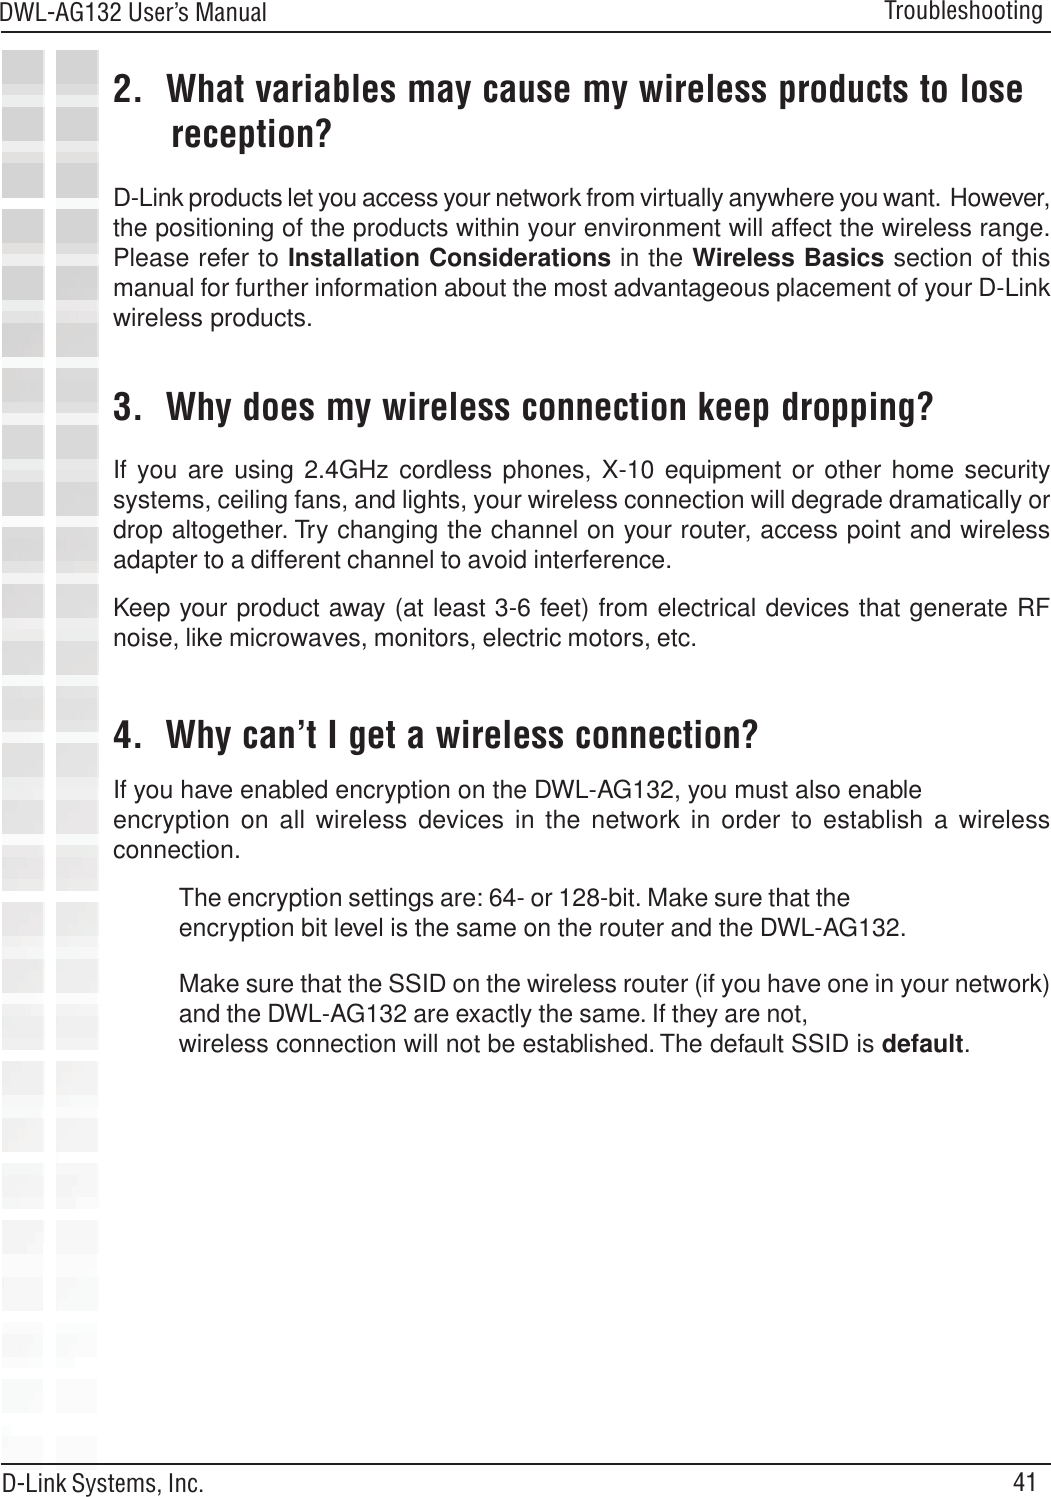 41DWL-AG132 User’s ManualD-Link Systems, Inc.Troubleshooting2.  What variables may cause my wireless products to lose      reception?D-Link products let you access your network from virtually anywhere you want.  However,the positioning of the products within your environment will affect the wireless range.Please refer to Installation Considerations in the Wireless Basics section of thismanual for further information about the most advantageous placement of your D-Linkwireless products.3.  Why does my wireless connection keep dropping?4.  Why can’t I get a wireless connection?If you have enabled encryption on the DWL-AG132, you must also enableencryption on all wireless devices in the network in order to establish a wirelessconnection.If you are using 2.4GHz cordless phones, X-10 equipment or other home securitysystems, ceiling fans, and lights, your wireless connection will degrade dramatically ordrop altogether. Try changing the channel on your router, access point and wirelessadapter to a different channel to avoid interference.Keep your product away (at least 3-6 feet) from electrical devices that generate RFnoise, like microwaves, monitors, electric motors, etc.The encryption settings are: 64- or 128-bit. Make sure that theencryption bit level is the same on the router and the DWL-AG132.Make sure that the SSID on the wireless router (if you have one in your network)and the DWL-AG132 are exactly the same. If they are not,wireless connection will not be established. The default SSID is default.